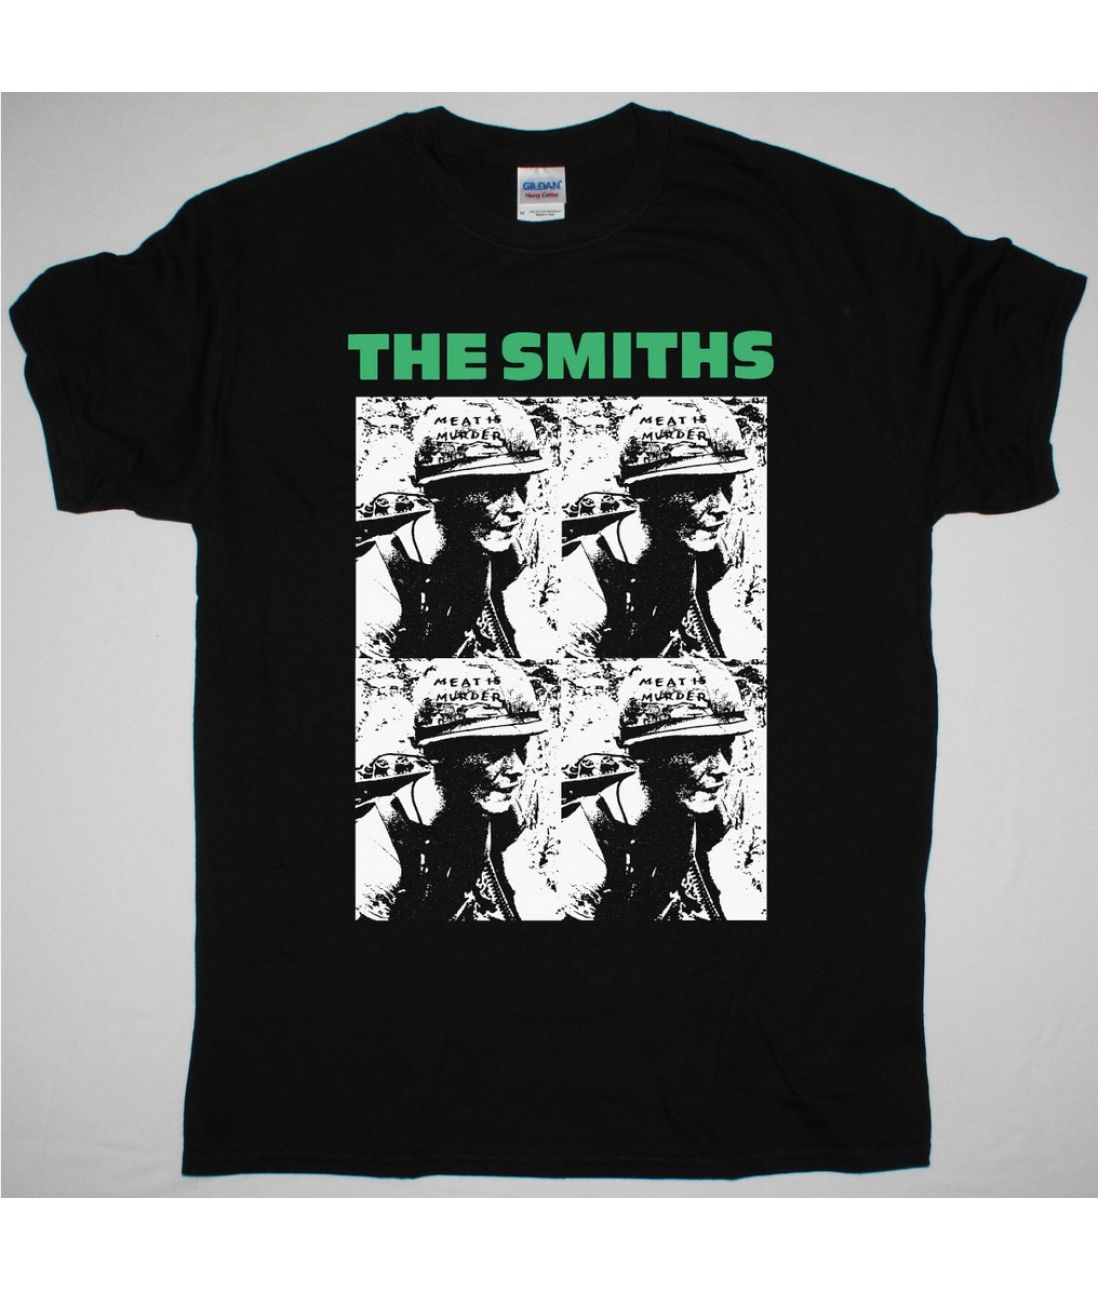 THE SMITHS MEAT IS MURDER NEW BLACK T SHIRT - Best Rock T-shirts